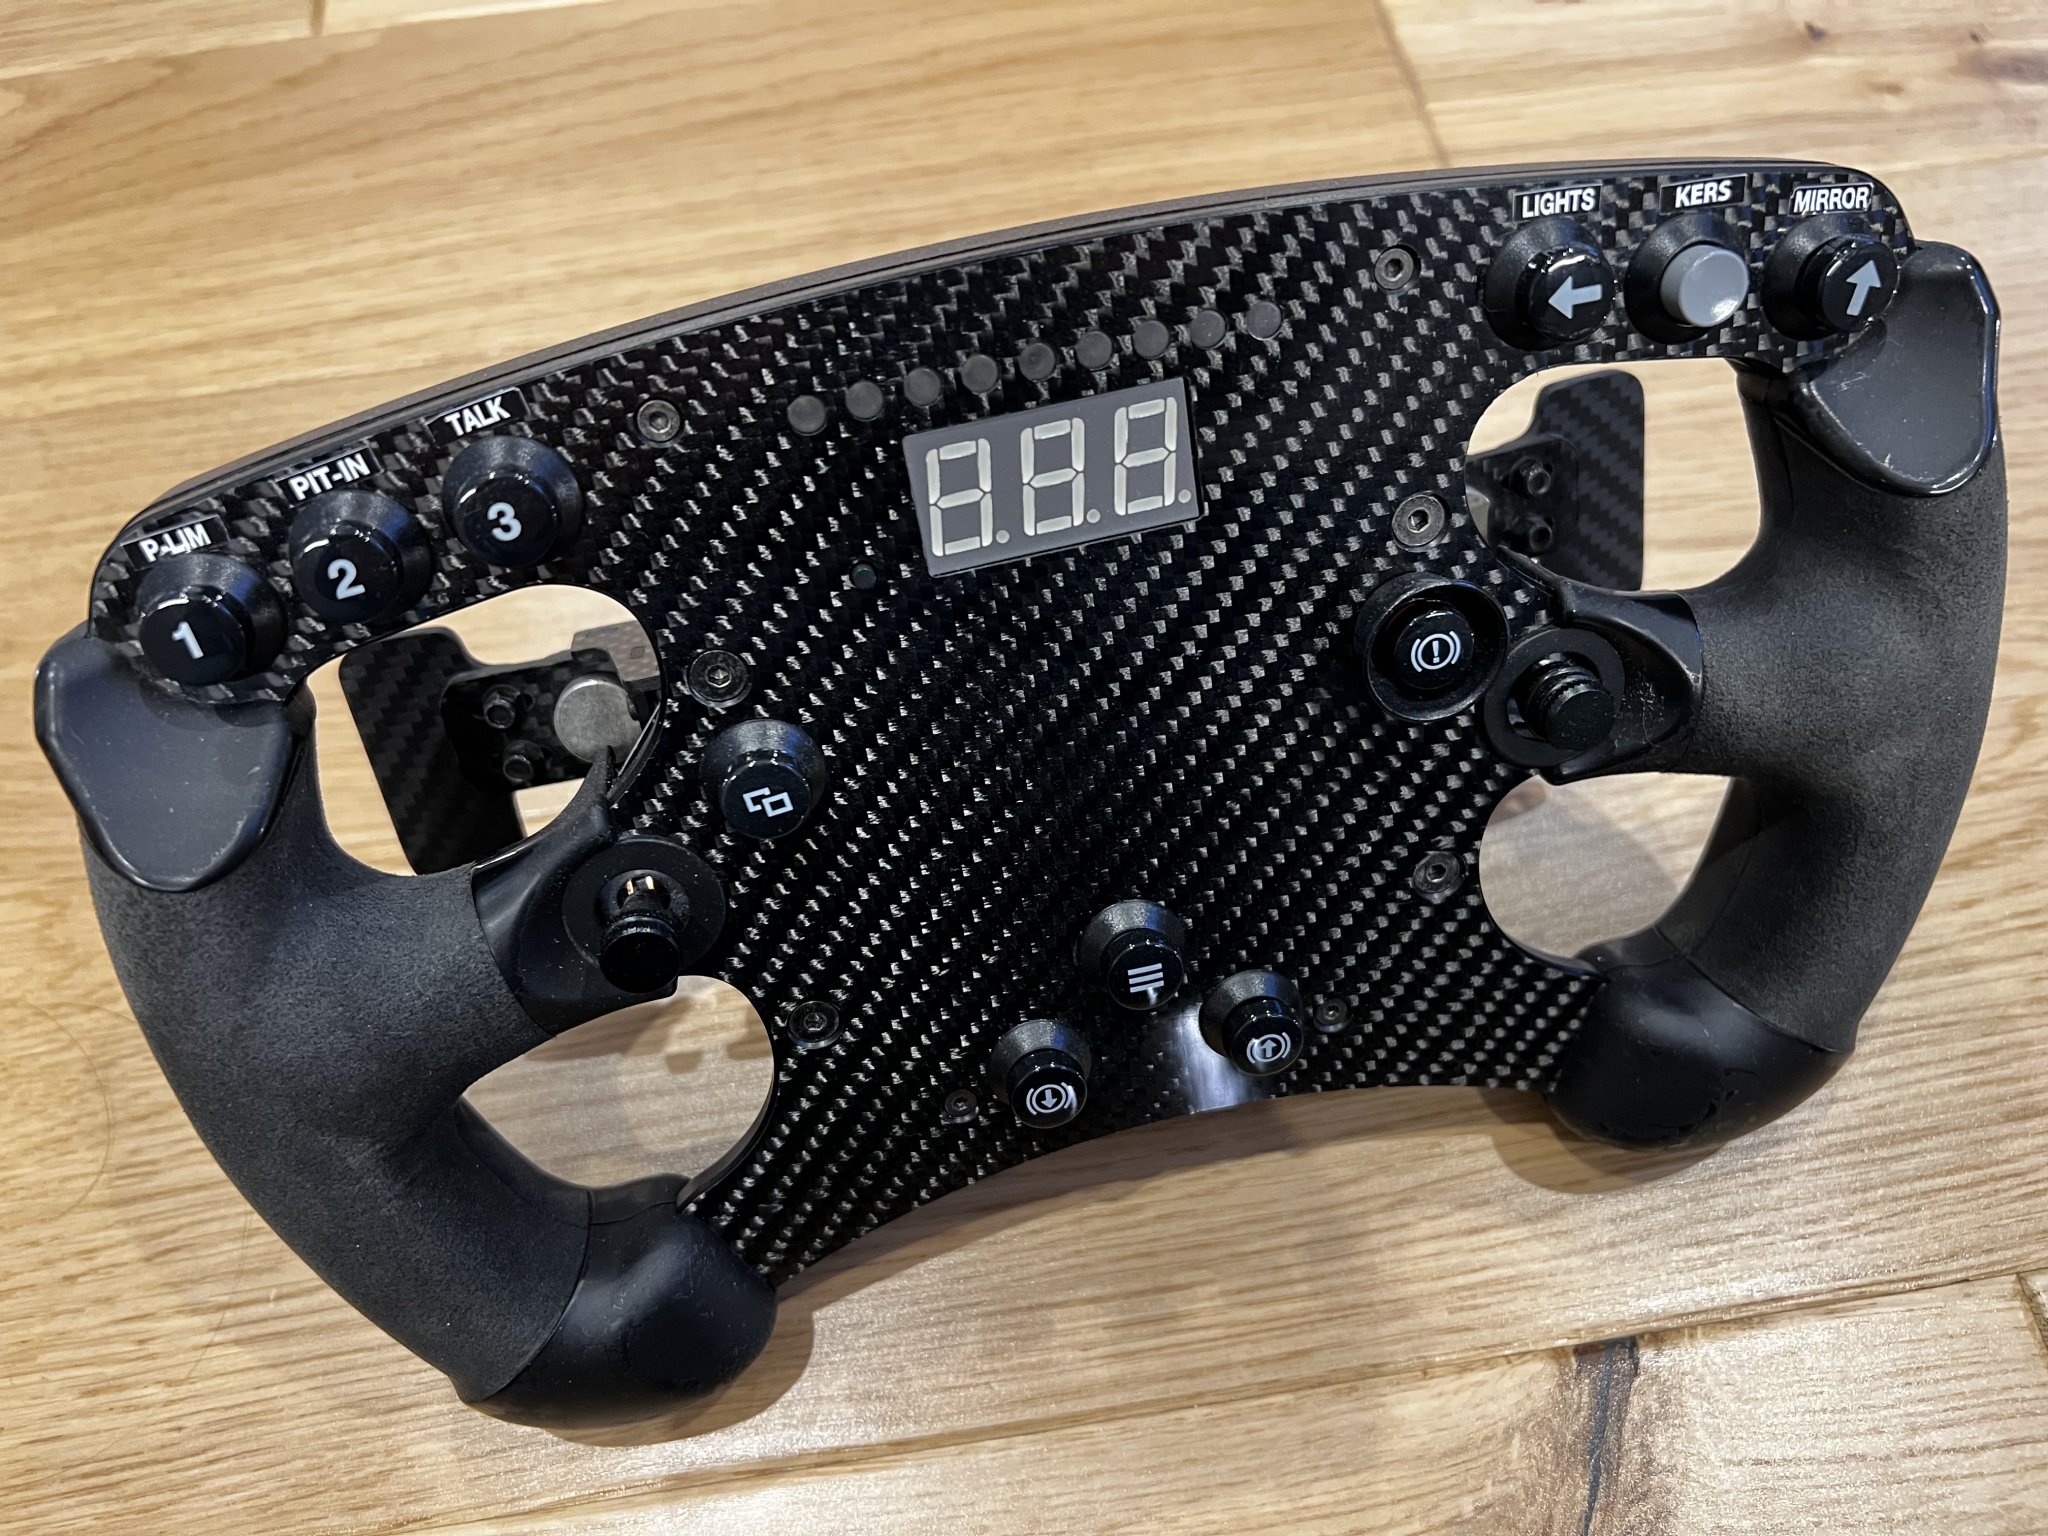 Sell - Fanatec Clubsport Formula Carbon wheel / Upgraded Carbon